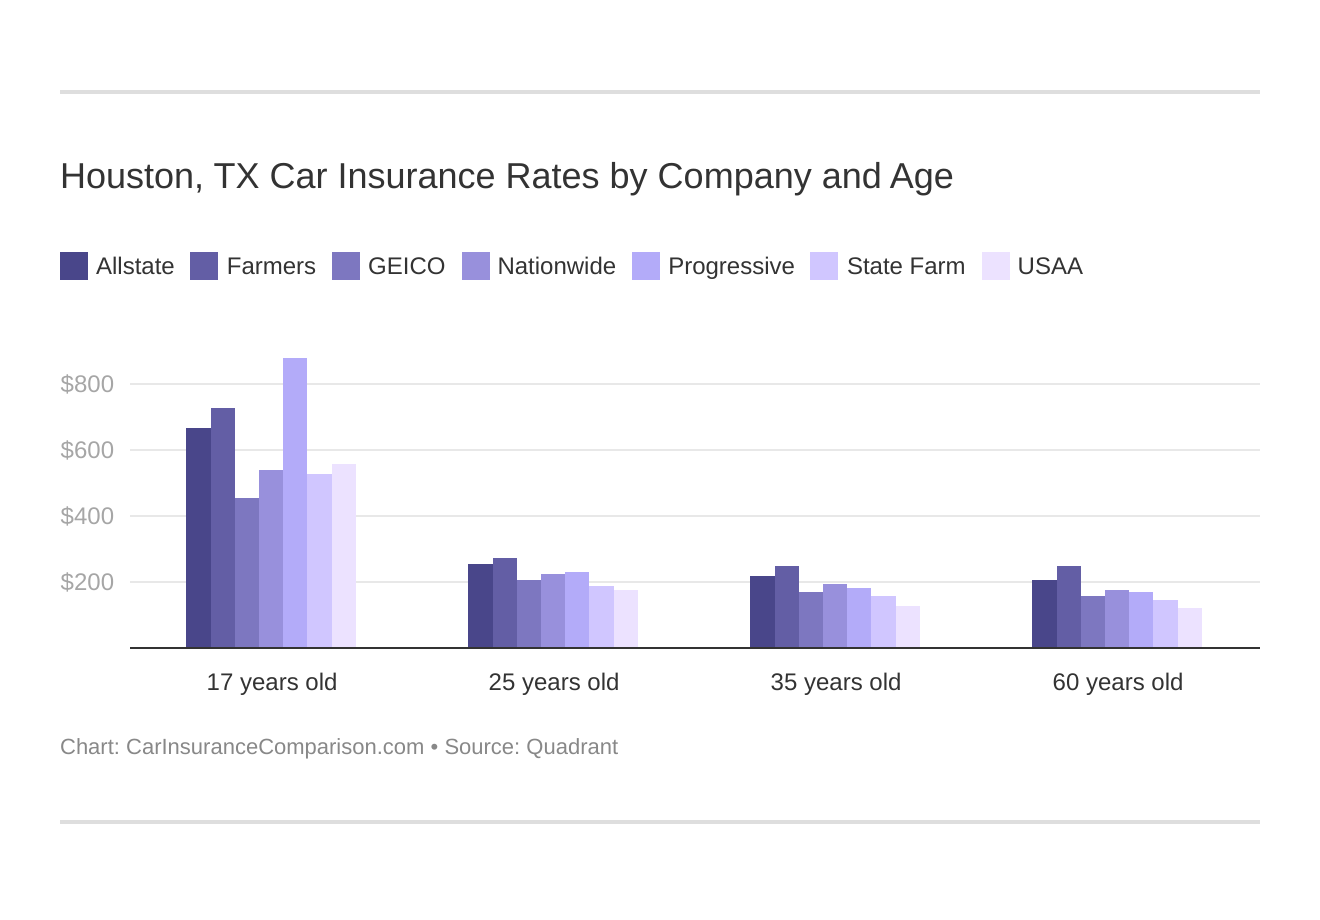 Houston, TX Car Insurance Rates by Company and Age